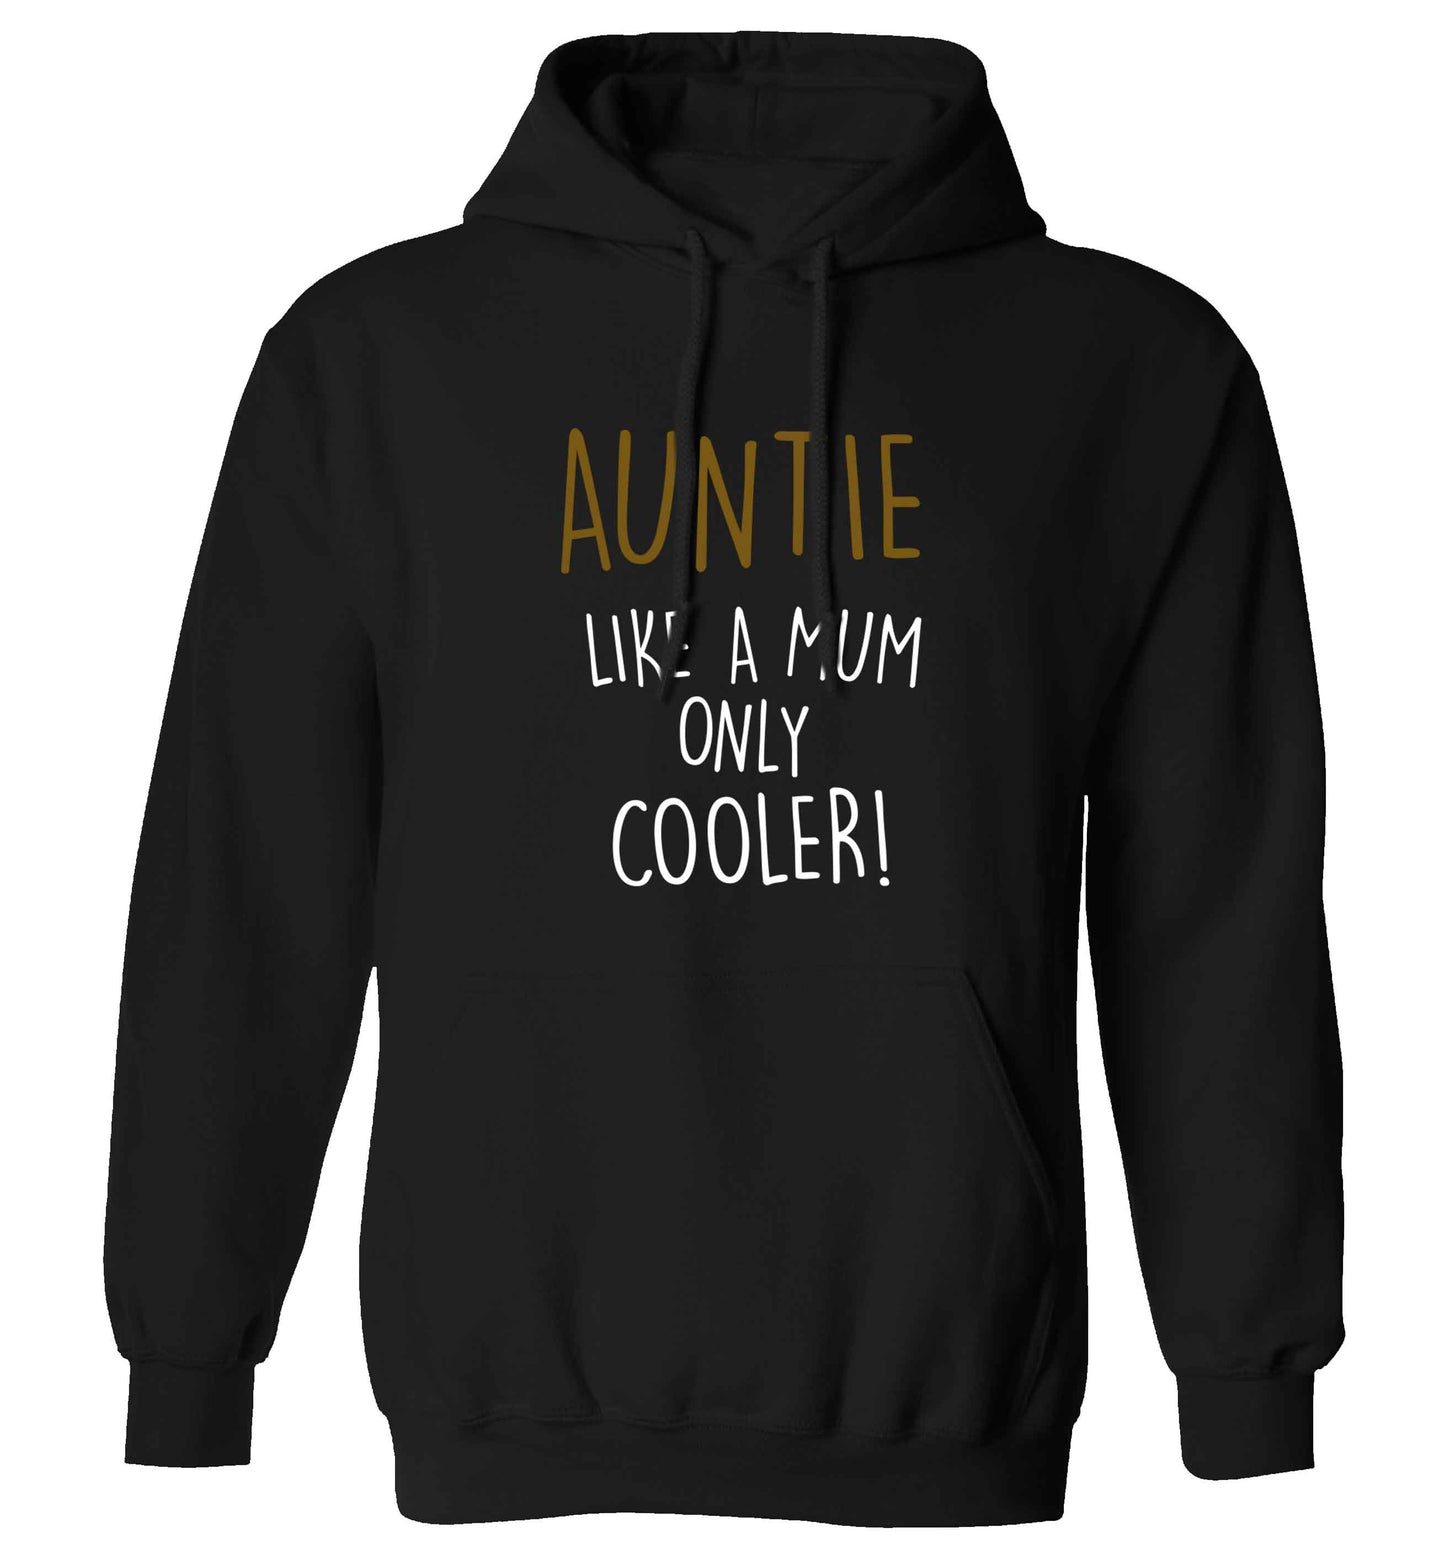 Auntie like a mum only cooler adults unisex black hoodie 2XL